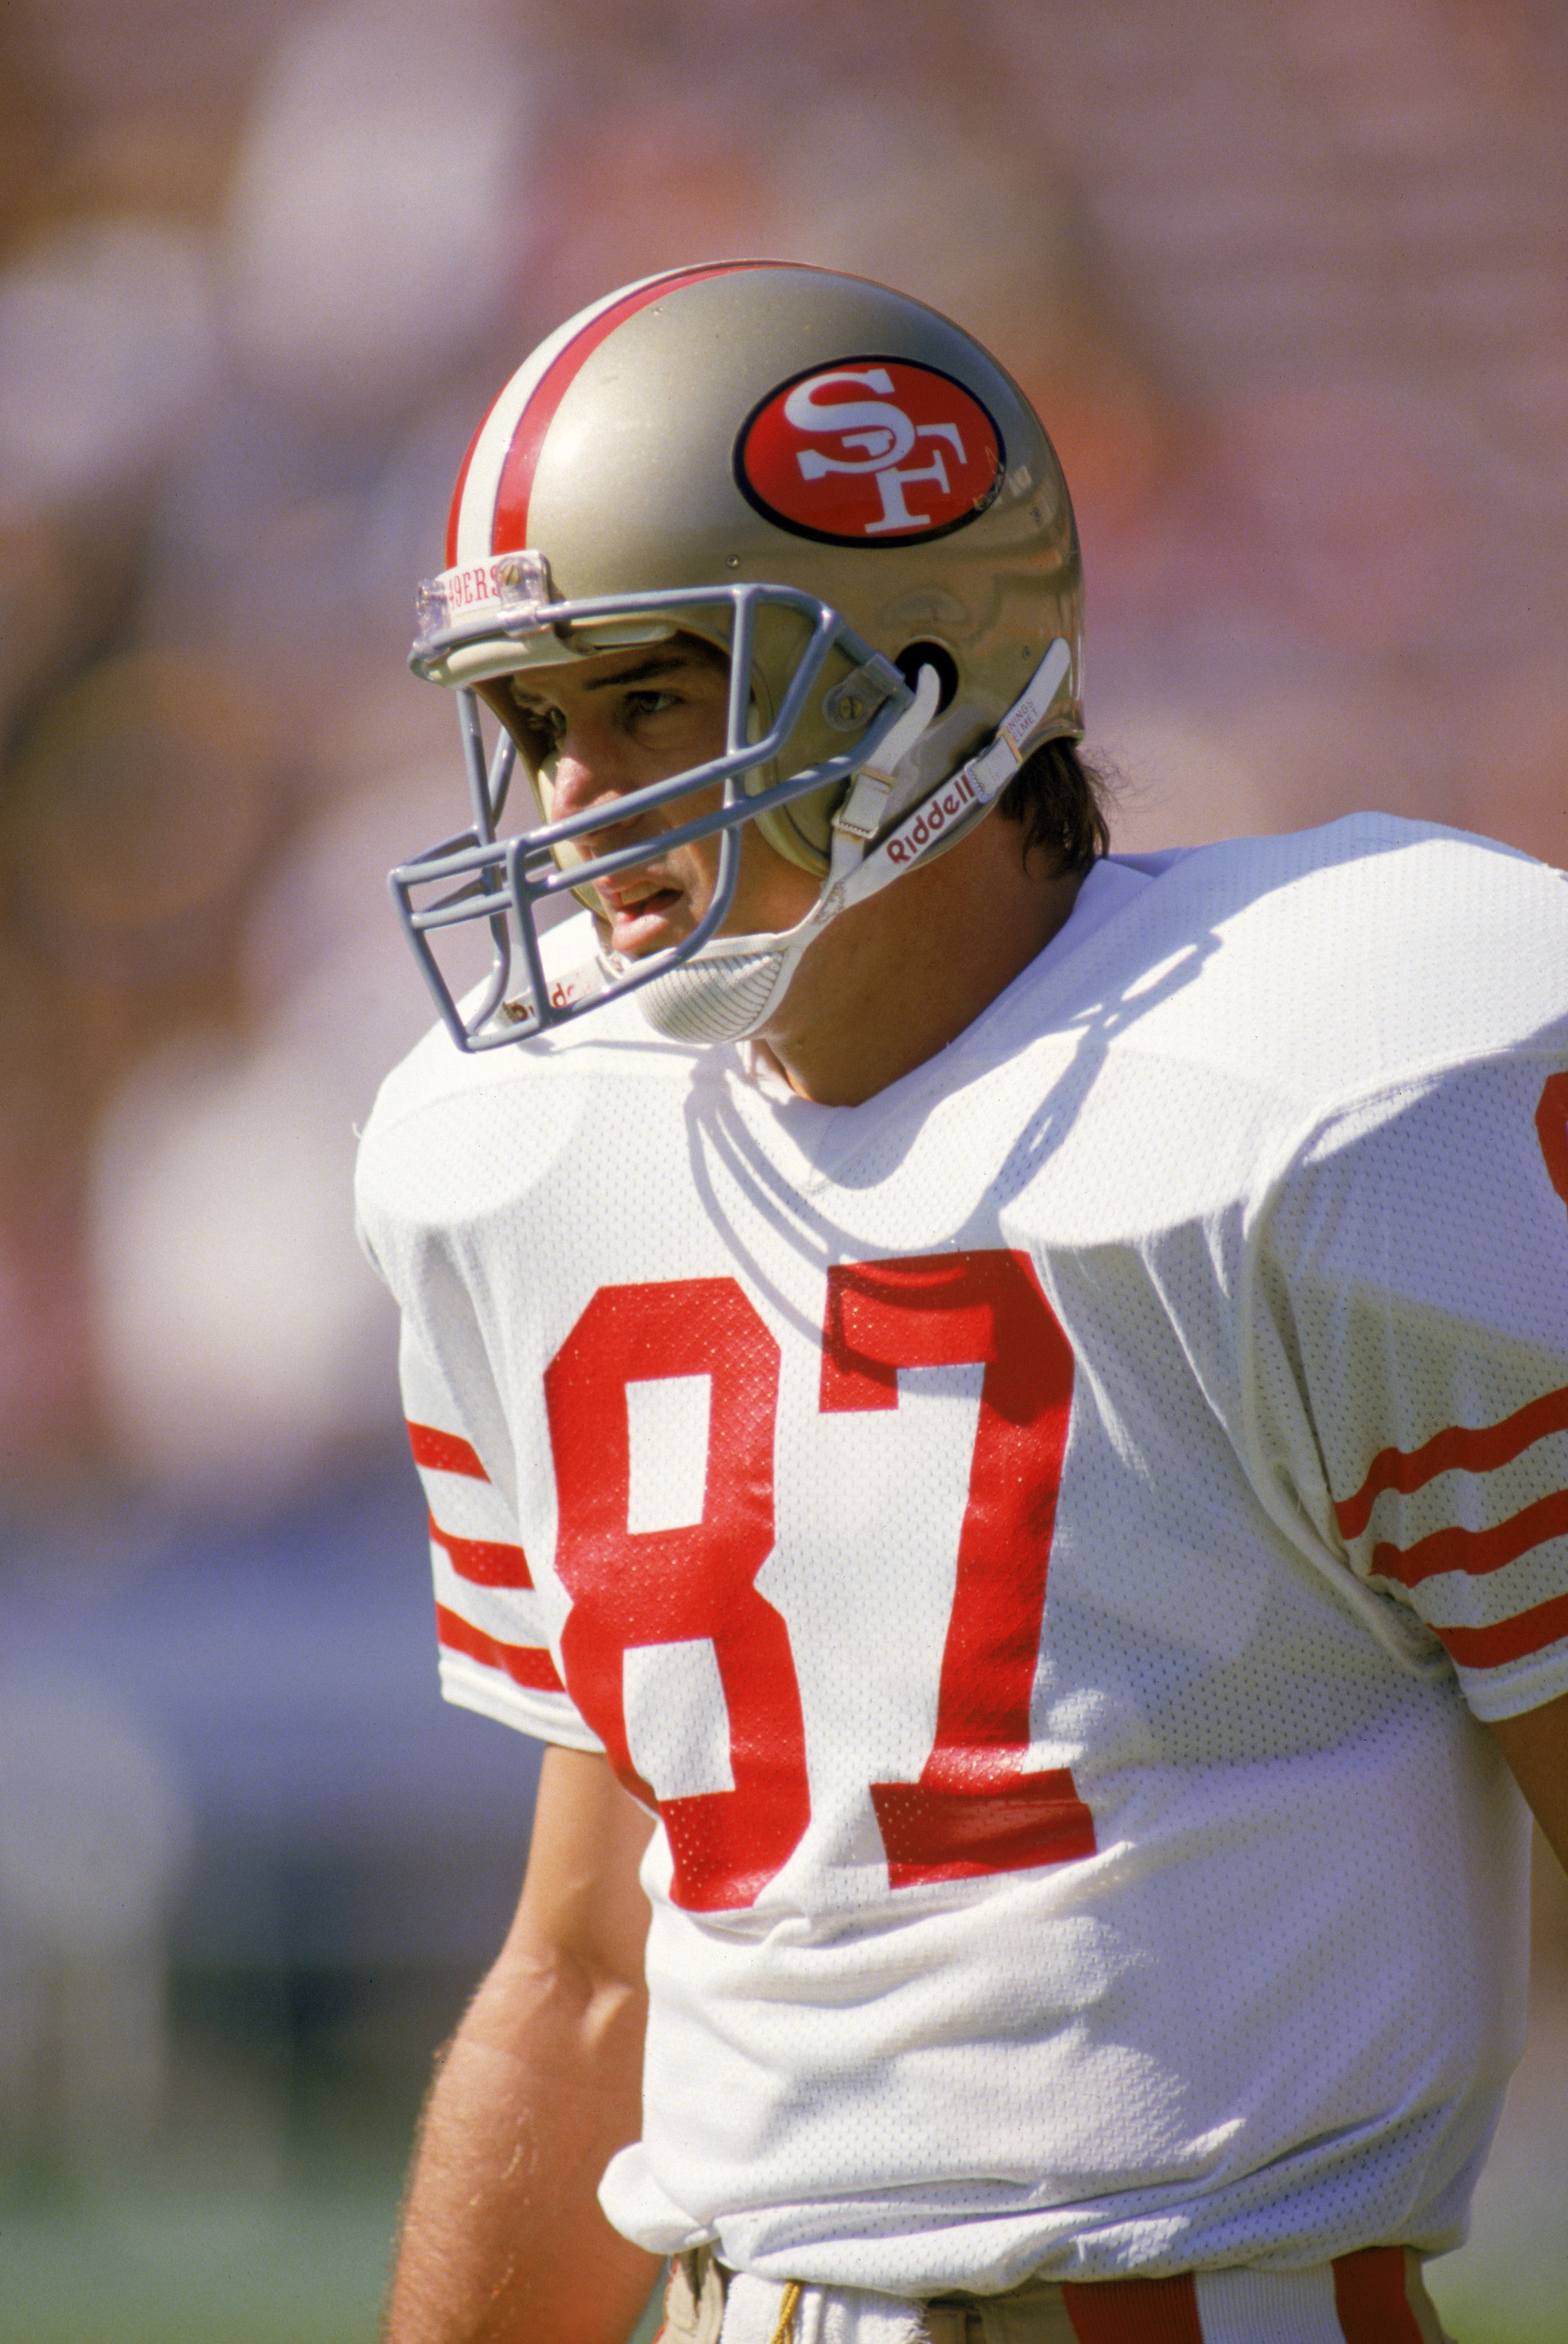 1987:  Dwight Clark plays in an NFL game for the San Francisco 49ers.  (Photo by Rick Stewart/Getty Images)